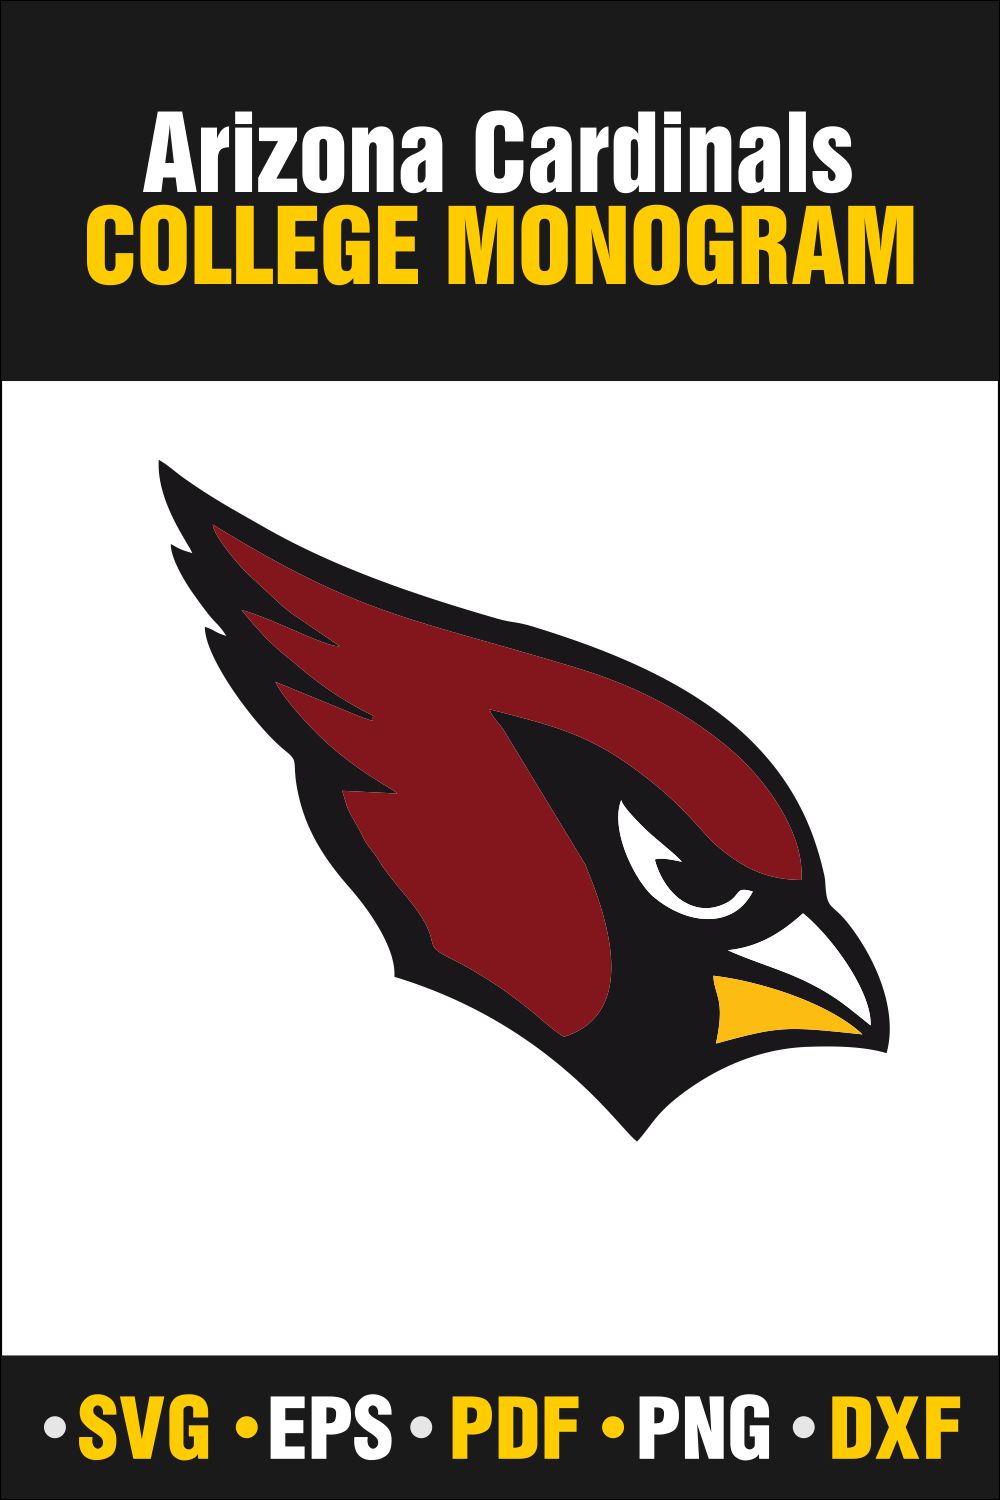 Arizona Cardinals SVG, PDF, PNG, DXF, EPS - Only $2 pinterest preview image.